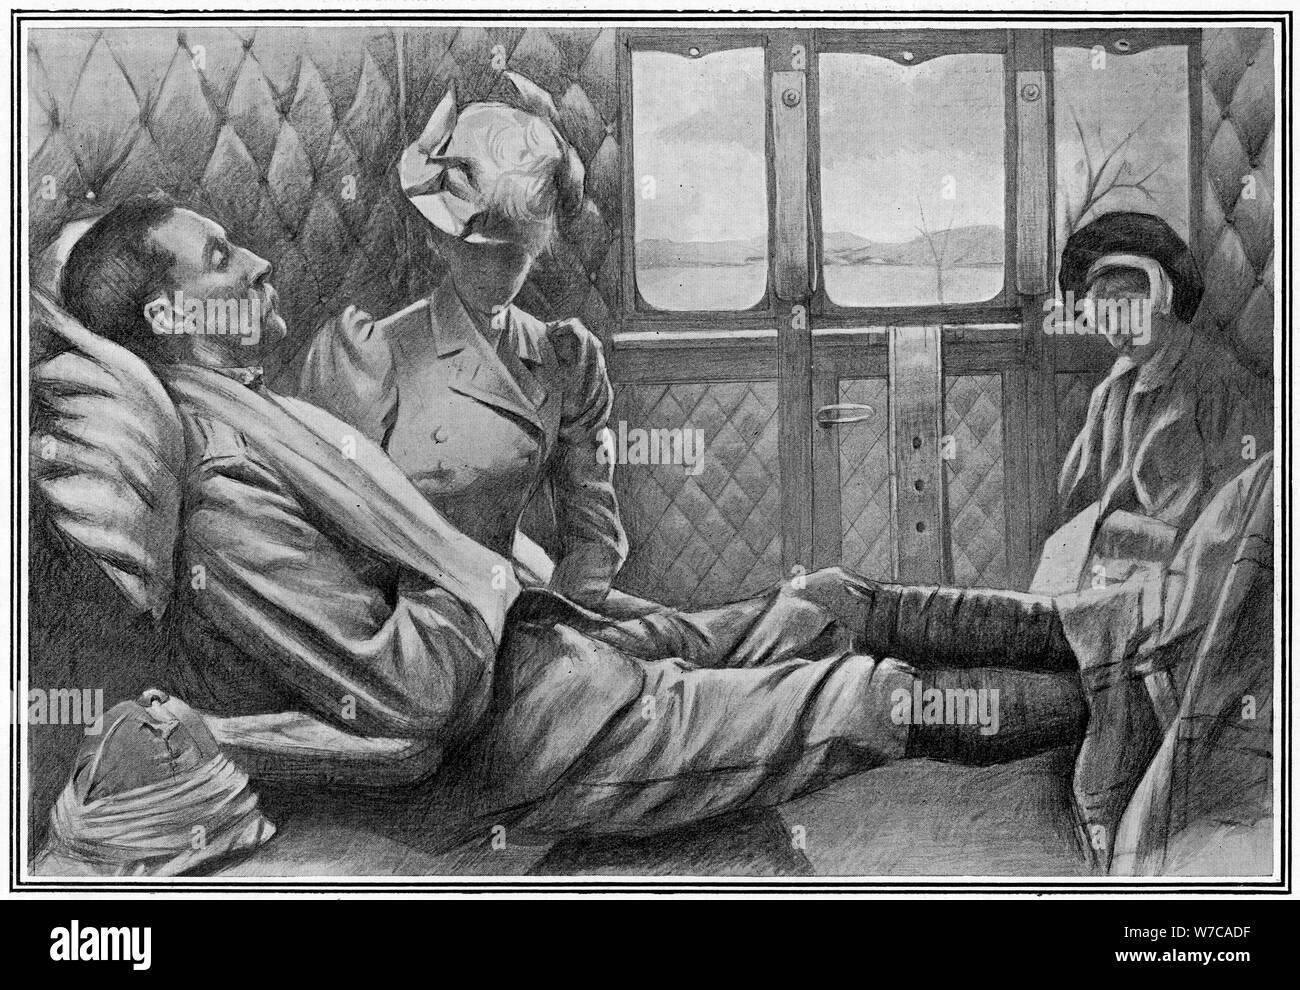 Casualty of the 2nd Boer War, 1899-1902. Artist: Anon Stock Photo